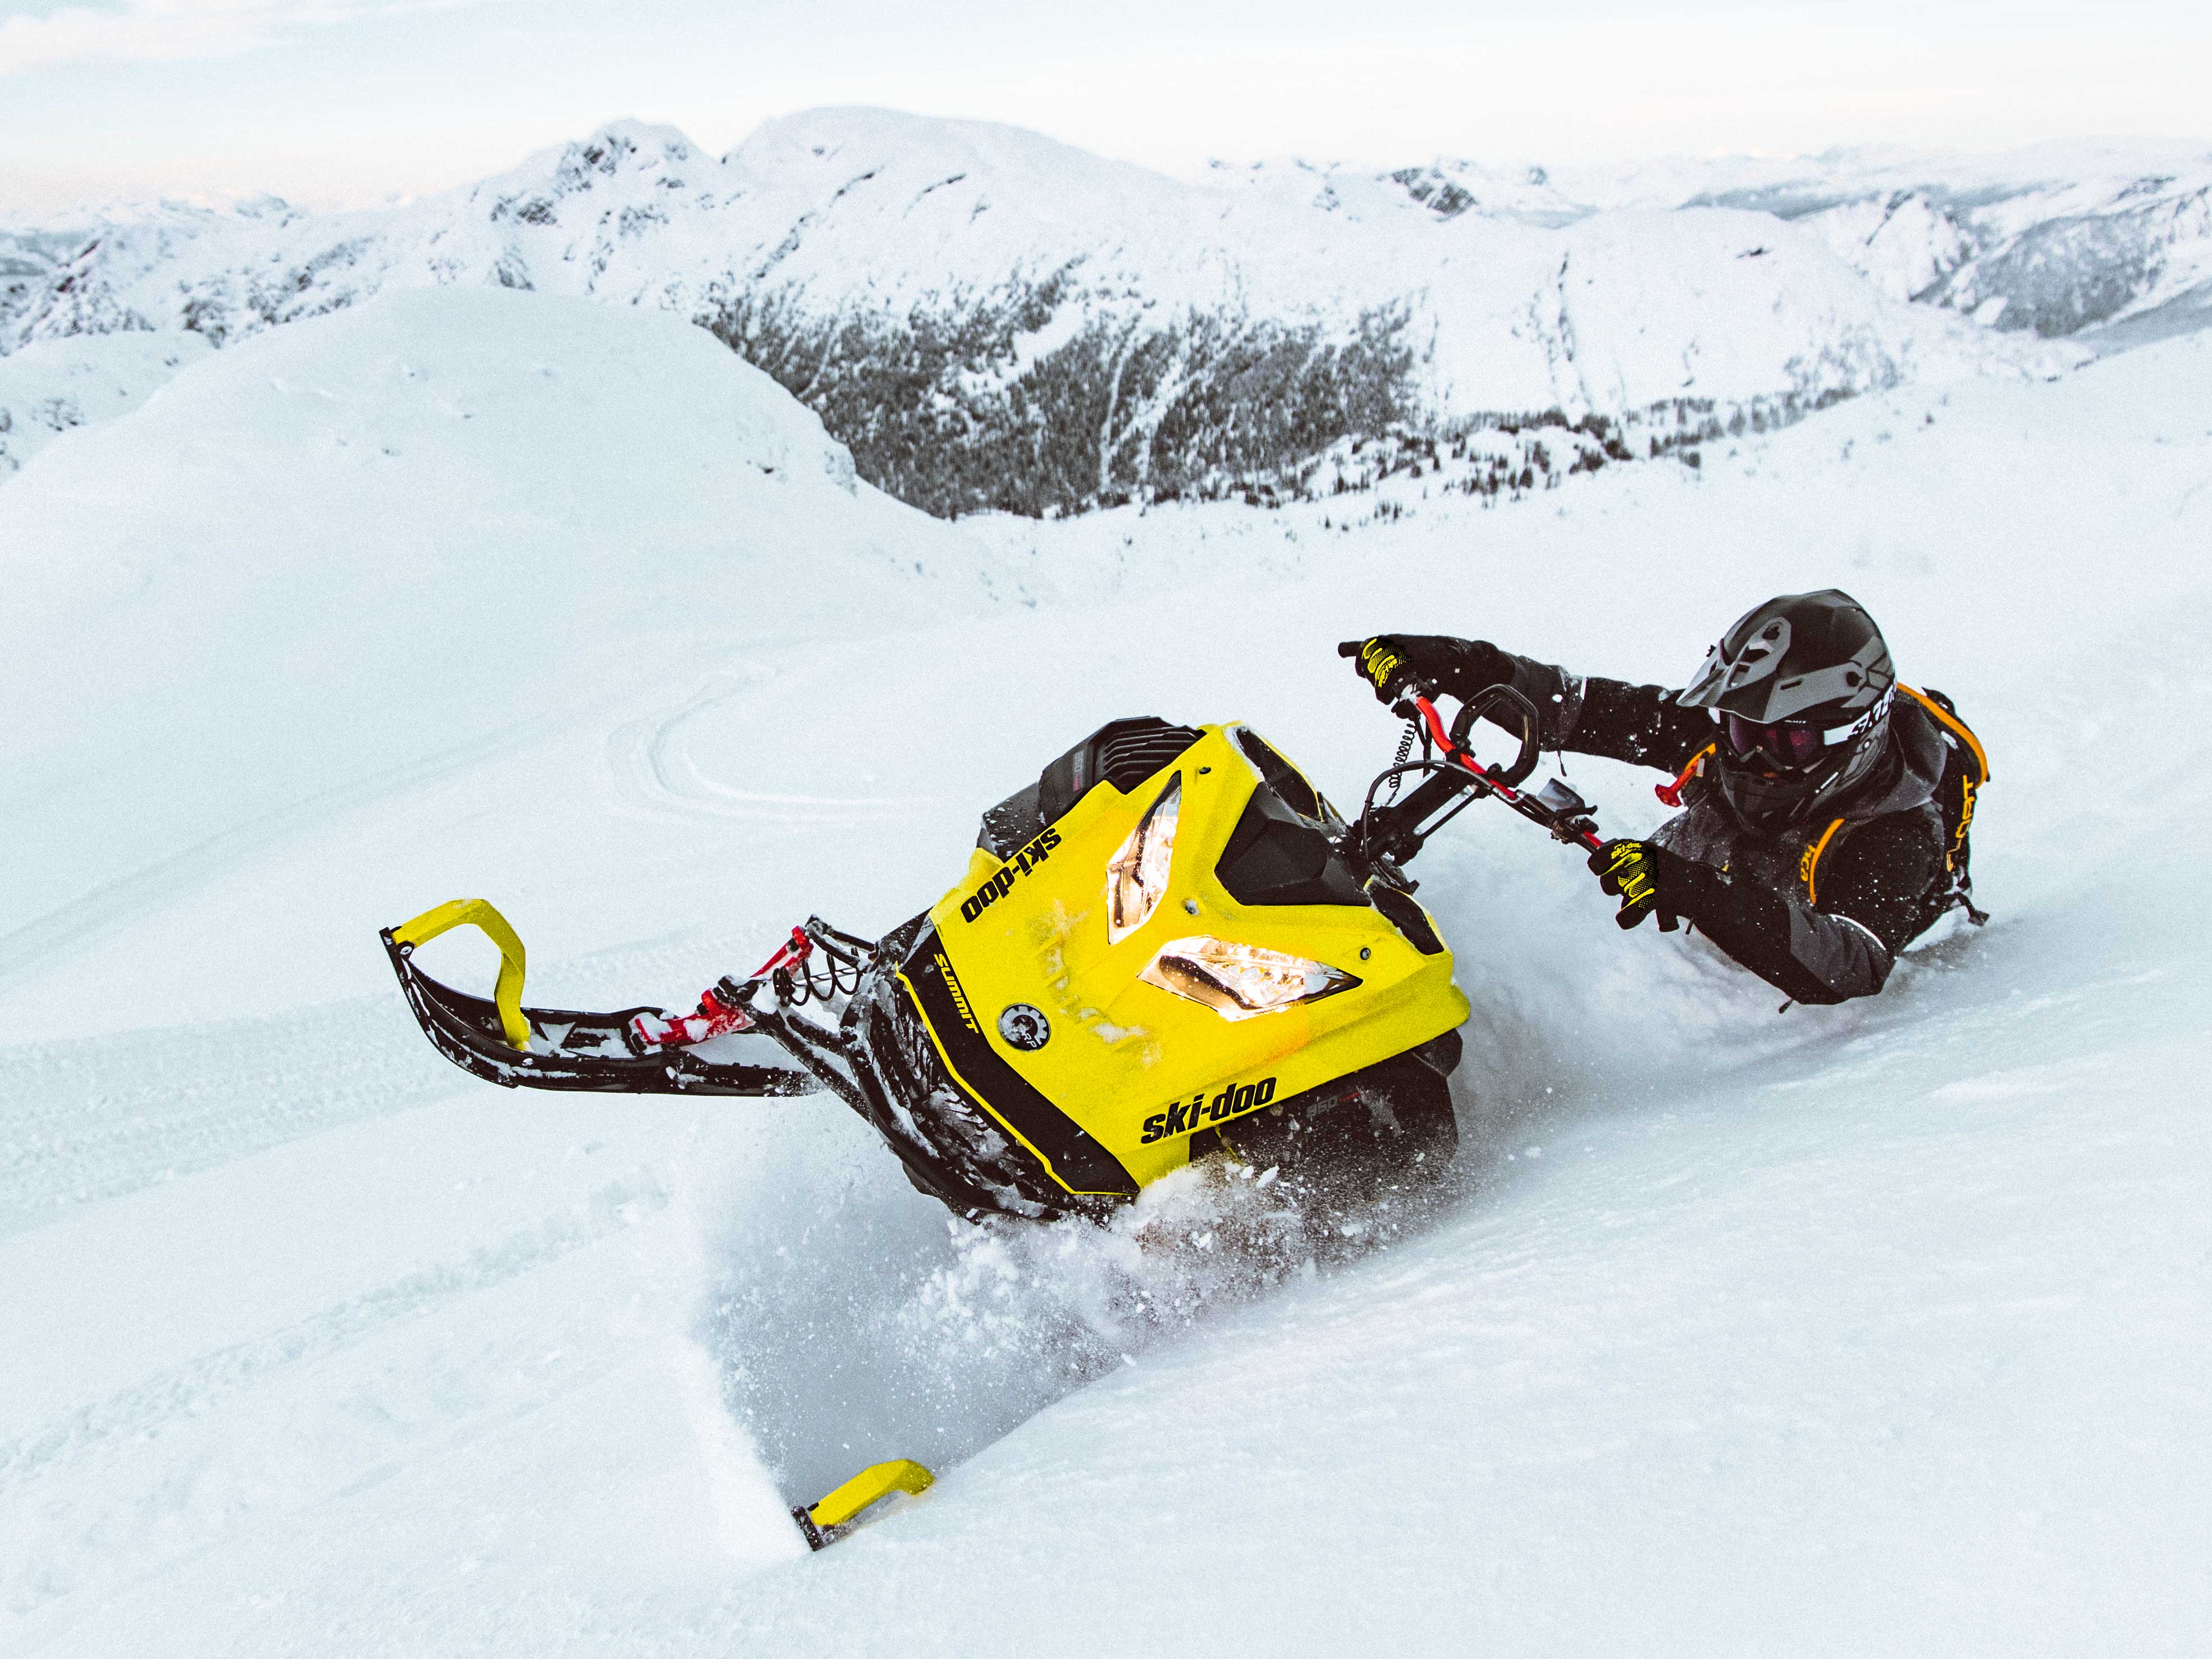 Carl Kuster riding in Deep-Snow with his Ski-Doo Summit